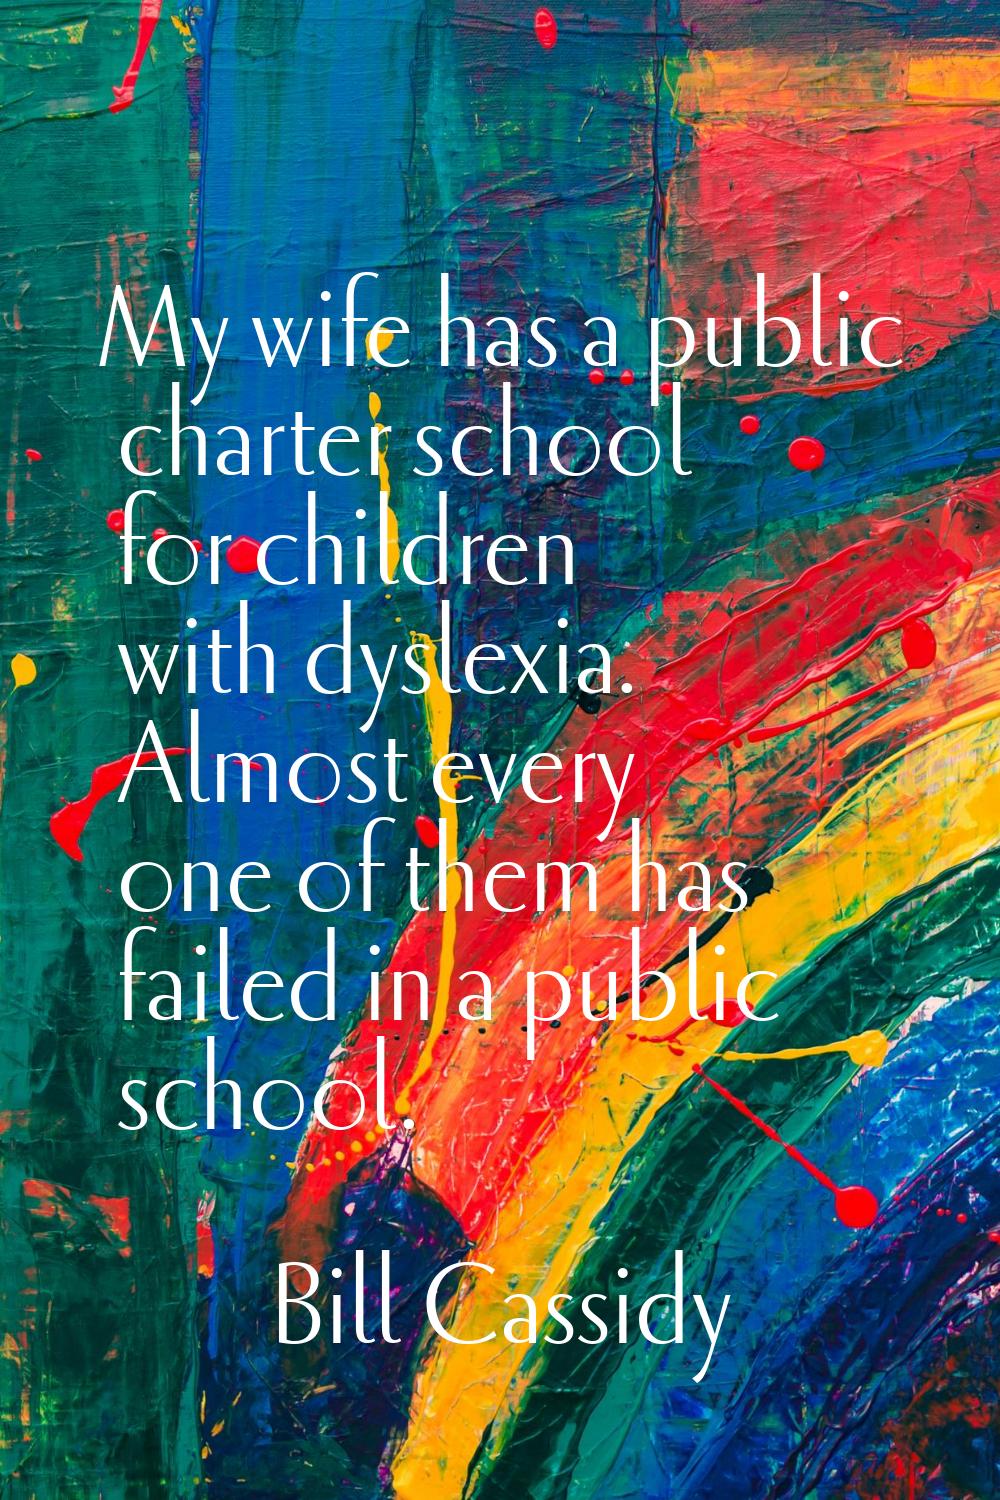 My wife has a public charter school for children with dyslexia. Almost every one of them has failed